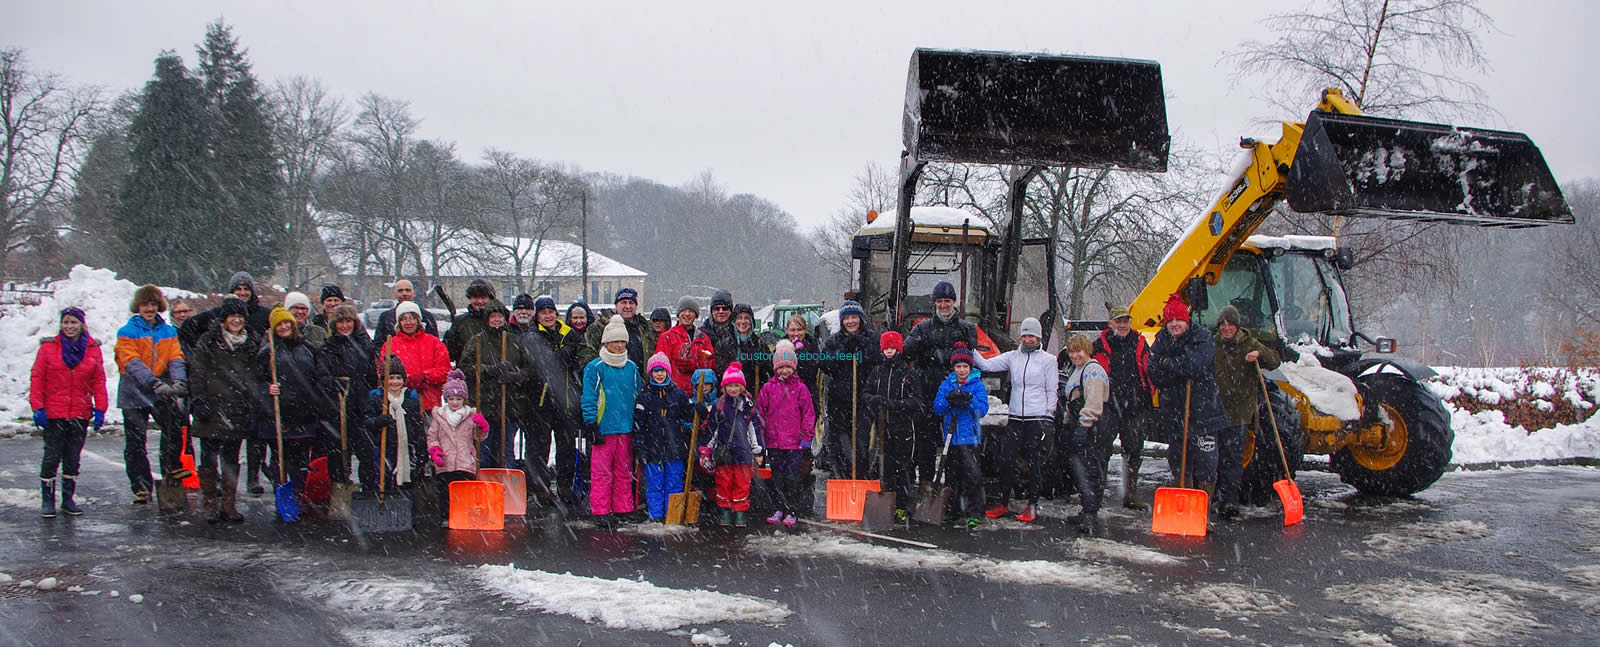 Community comes together to clear snow